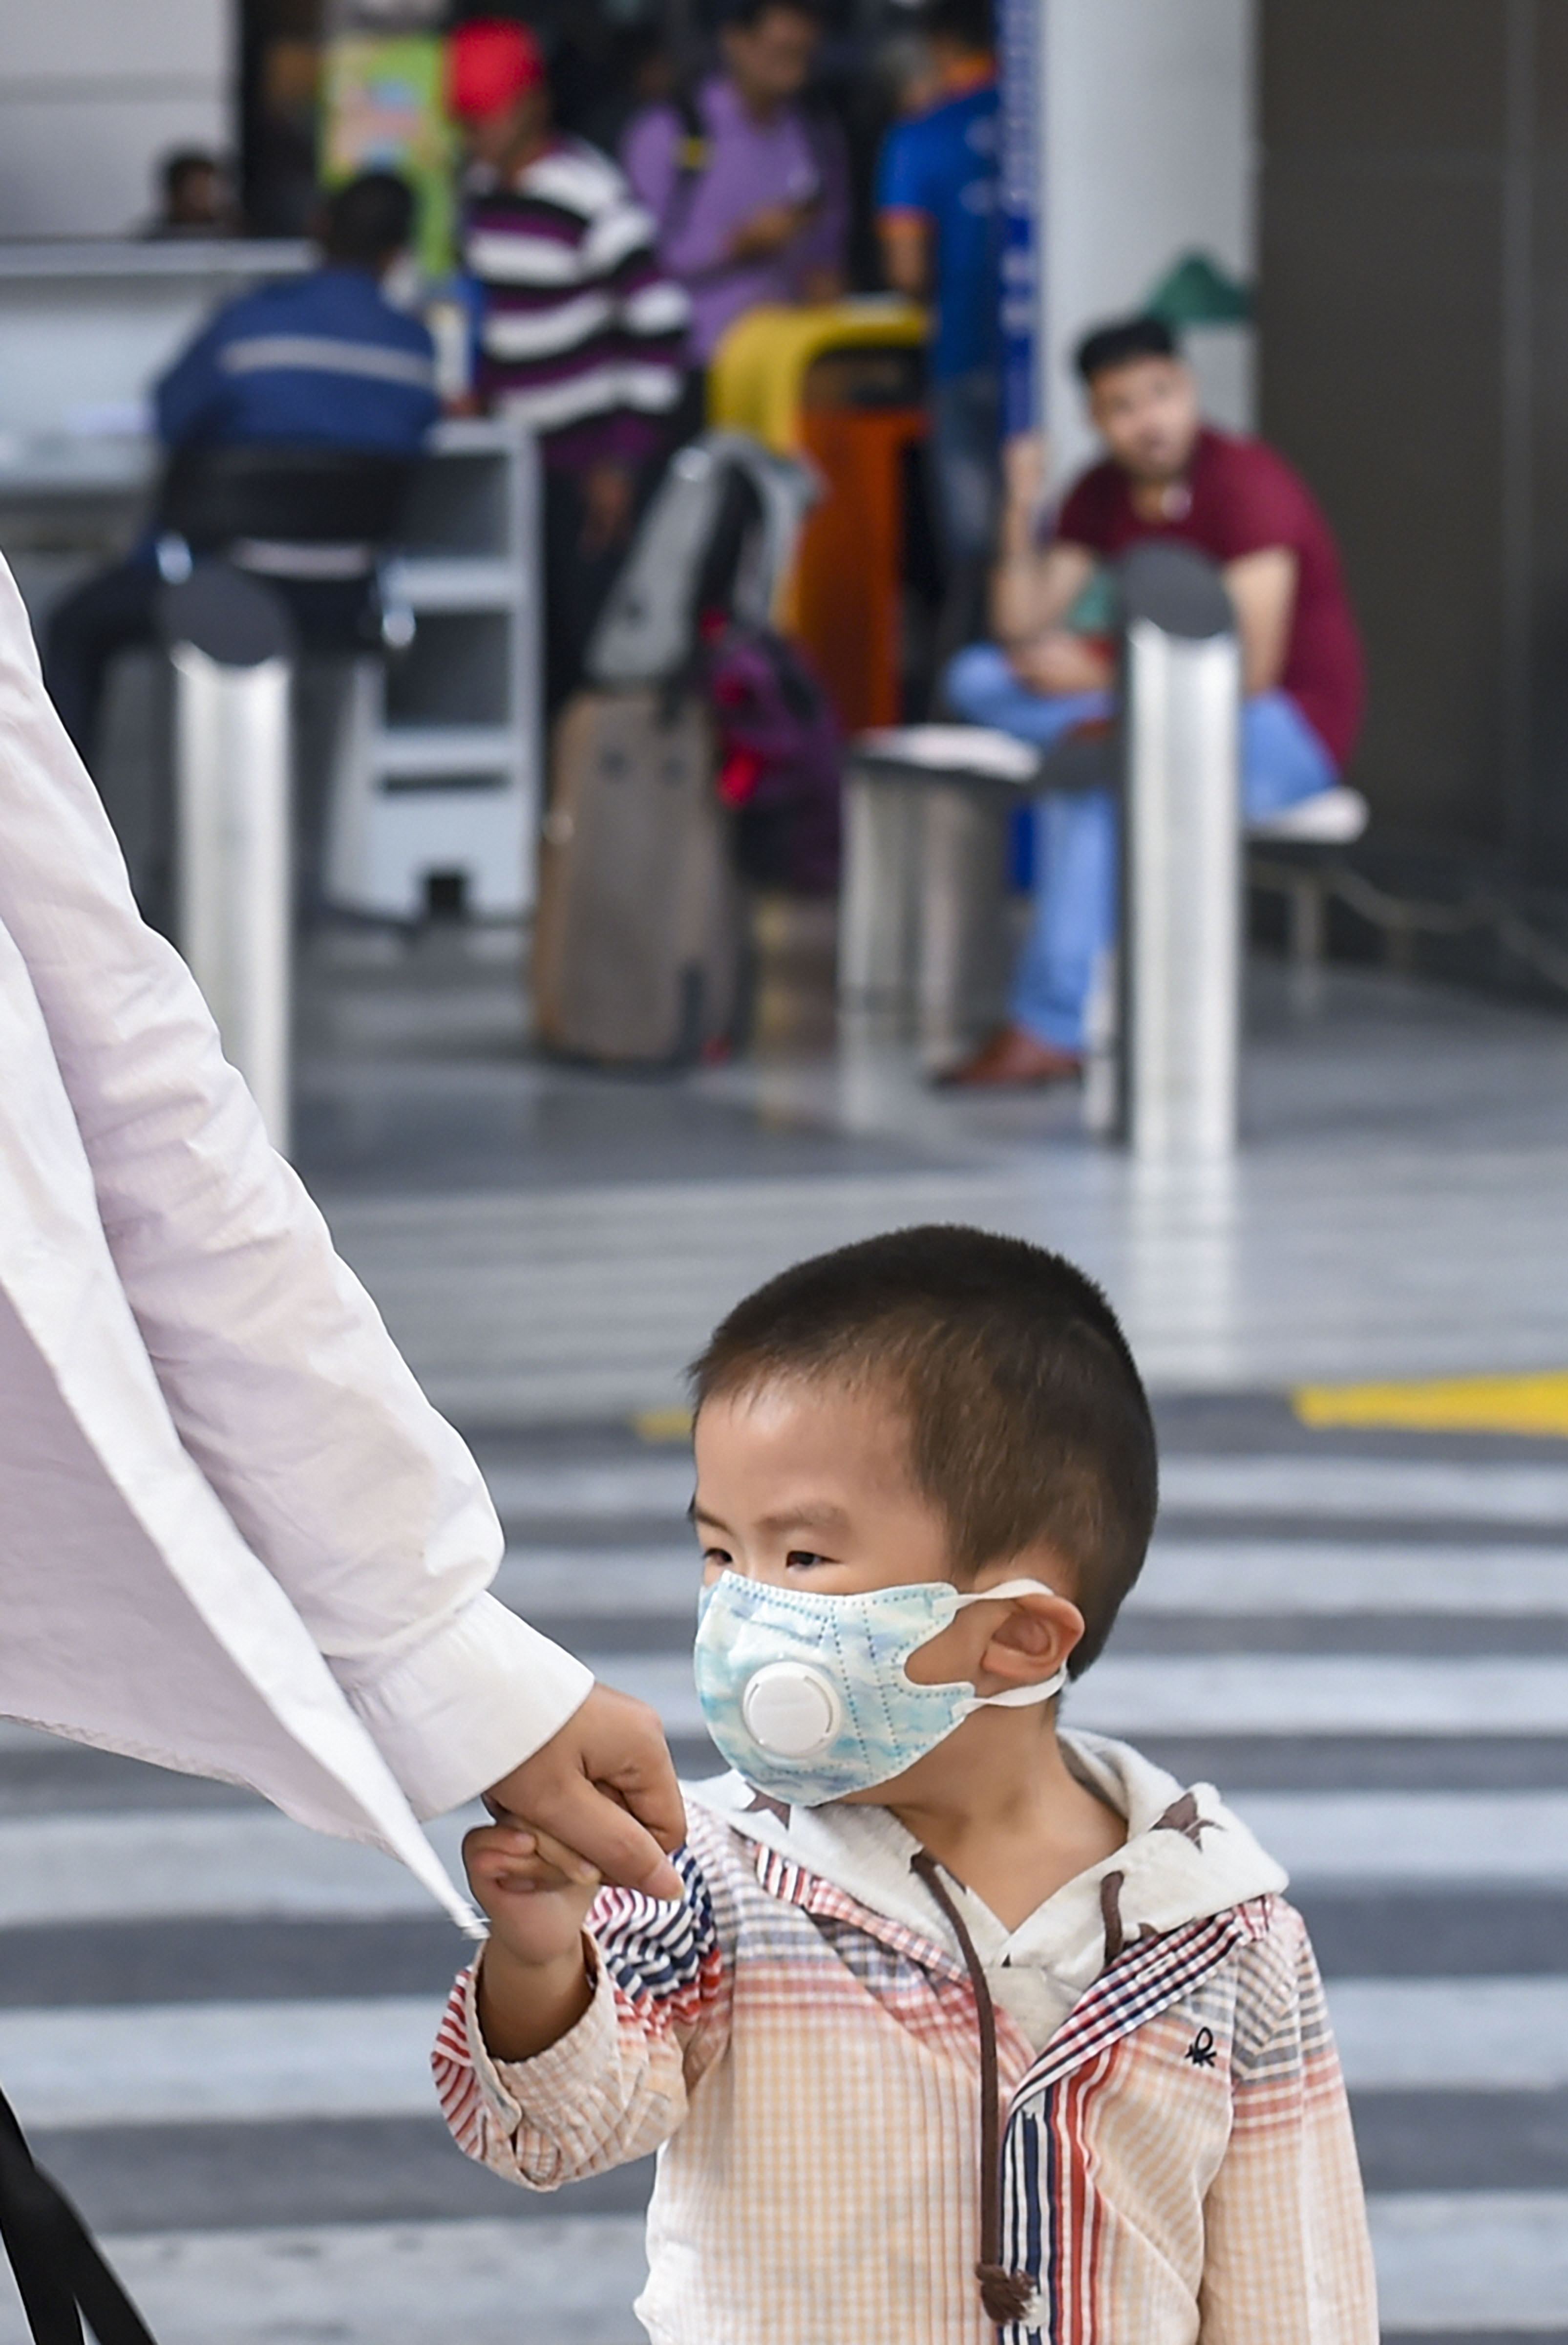  A child, wearing a mask for protection from air pollution, walks at T-3 of the IGI airport, in New Delhi, Wednesday, November 20, 2019.